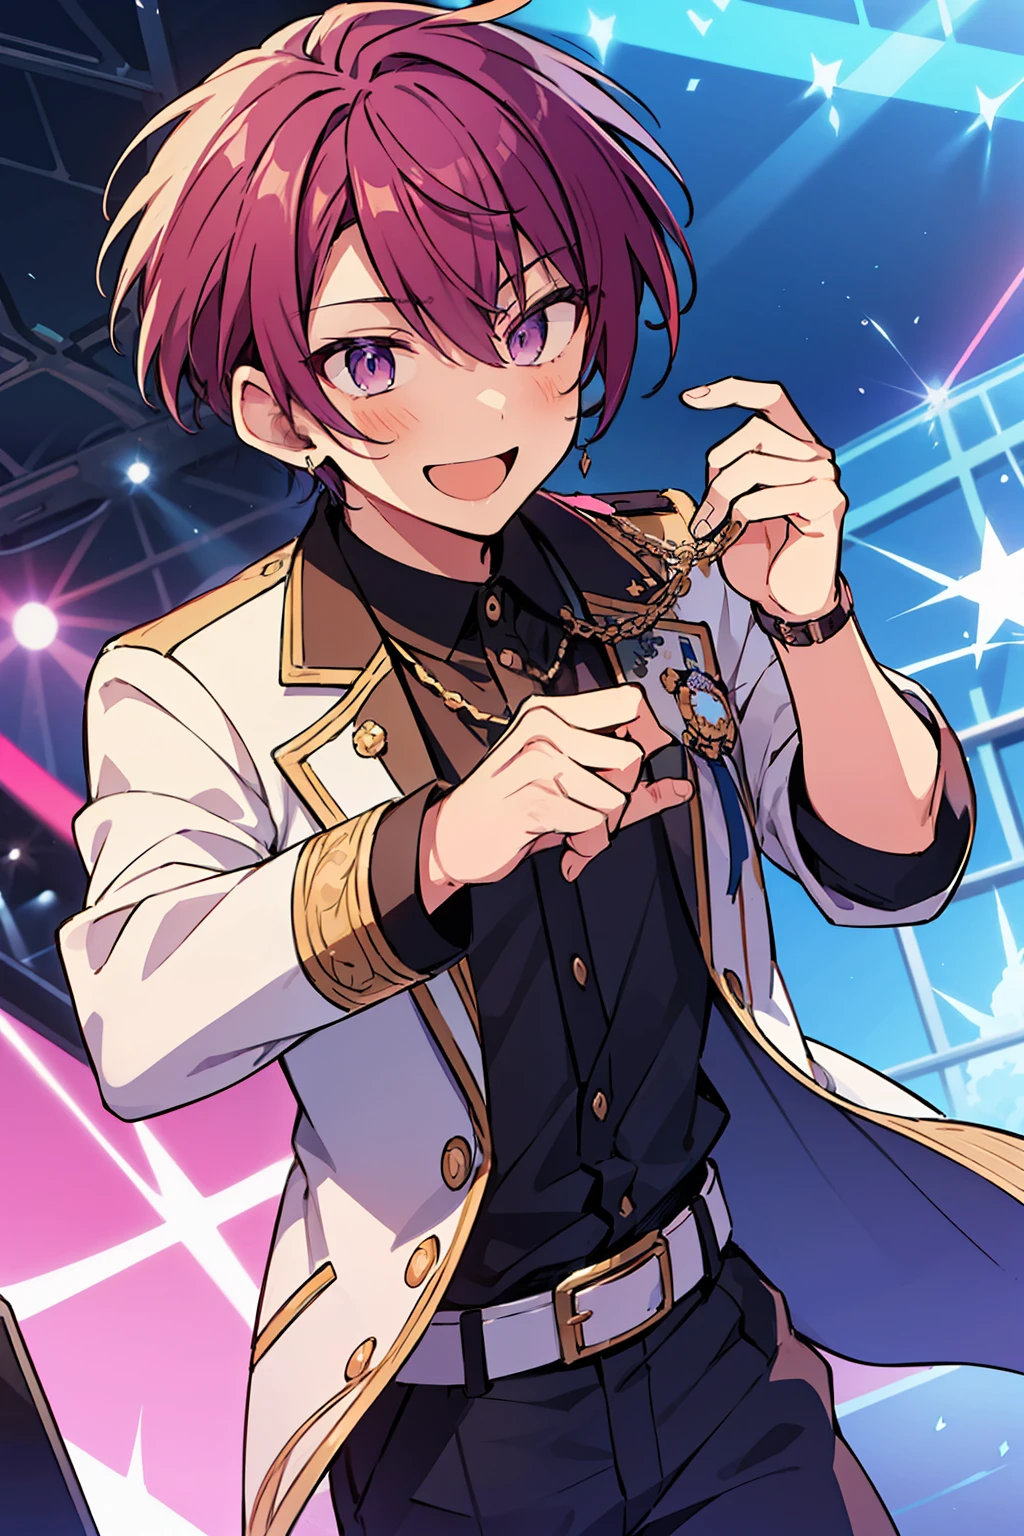 (high-quality, breathtaking),(expressive eyes, perfect face), 1boy, male, solo, short, young boy, purple hair with long parted bangs, pink eyes, laugh, purple idol outfit, pants, on stage